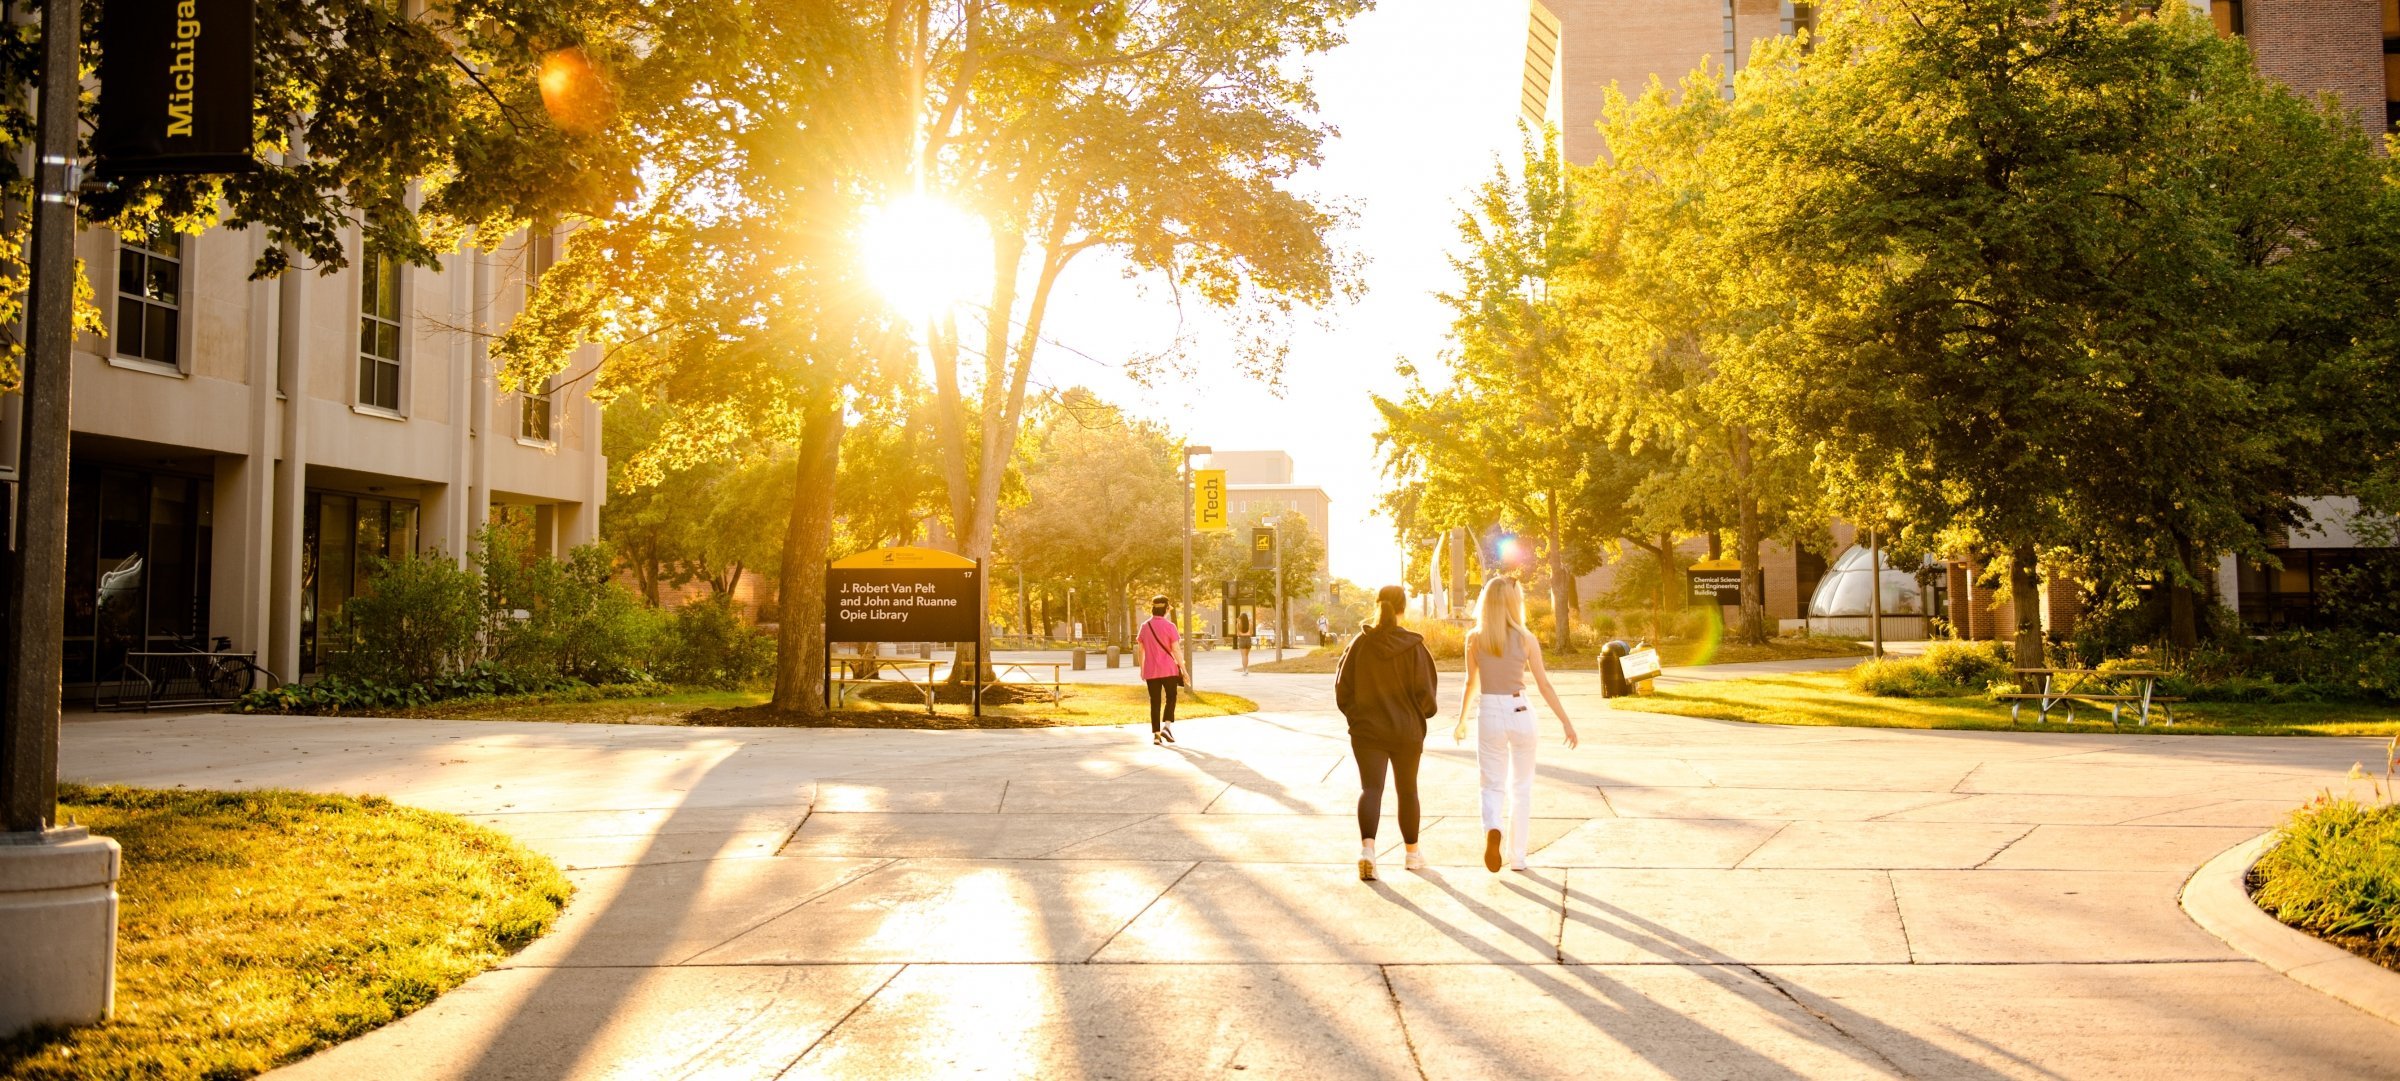 Michigan Technological University's campus at dawn with students walking